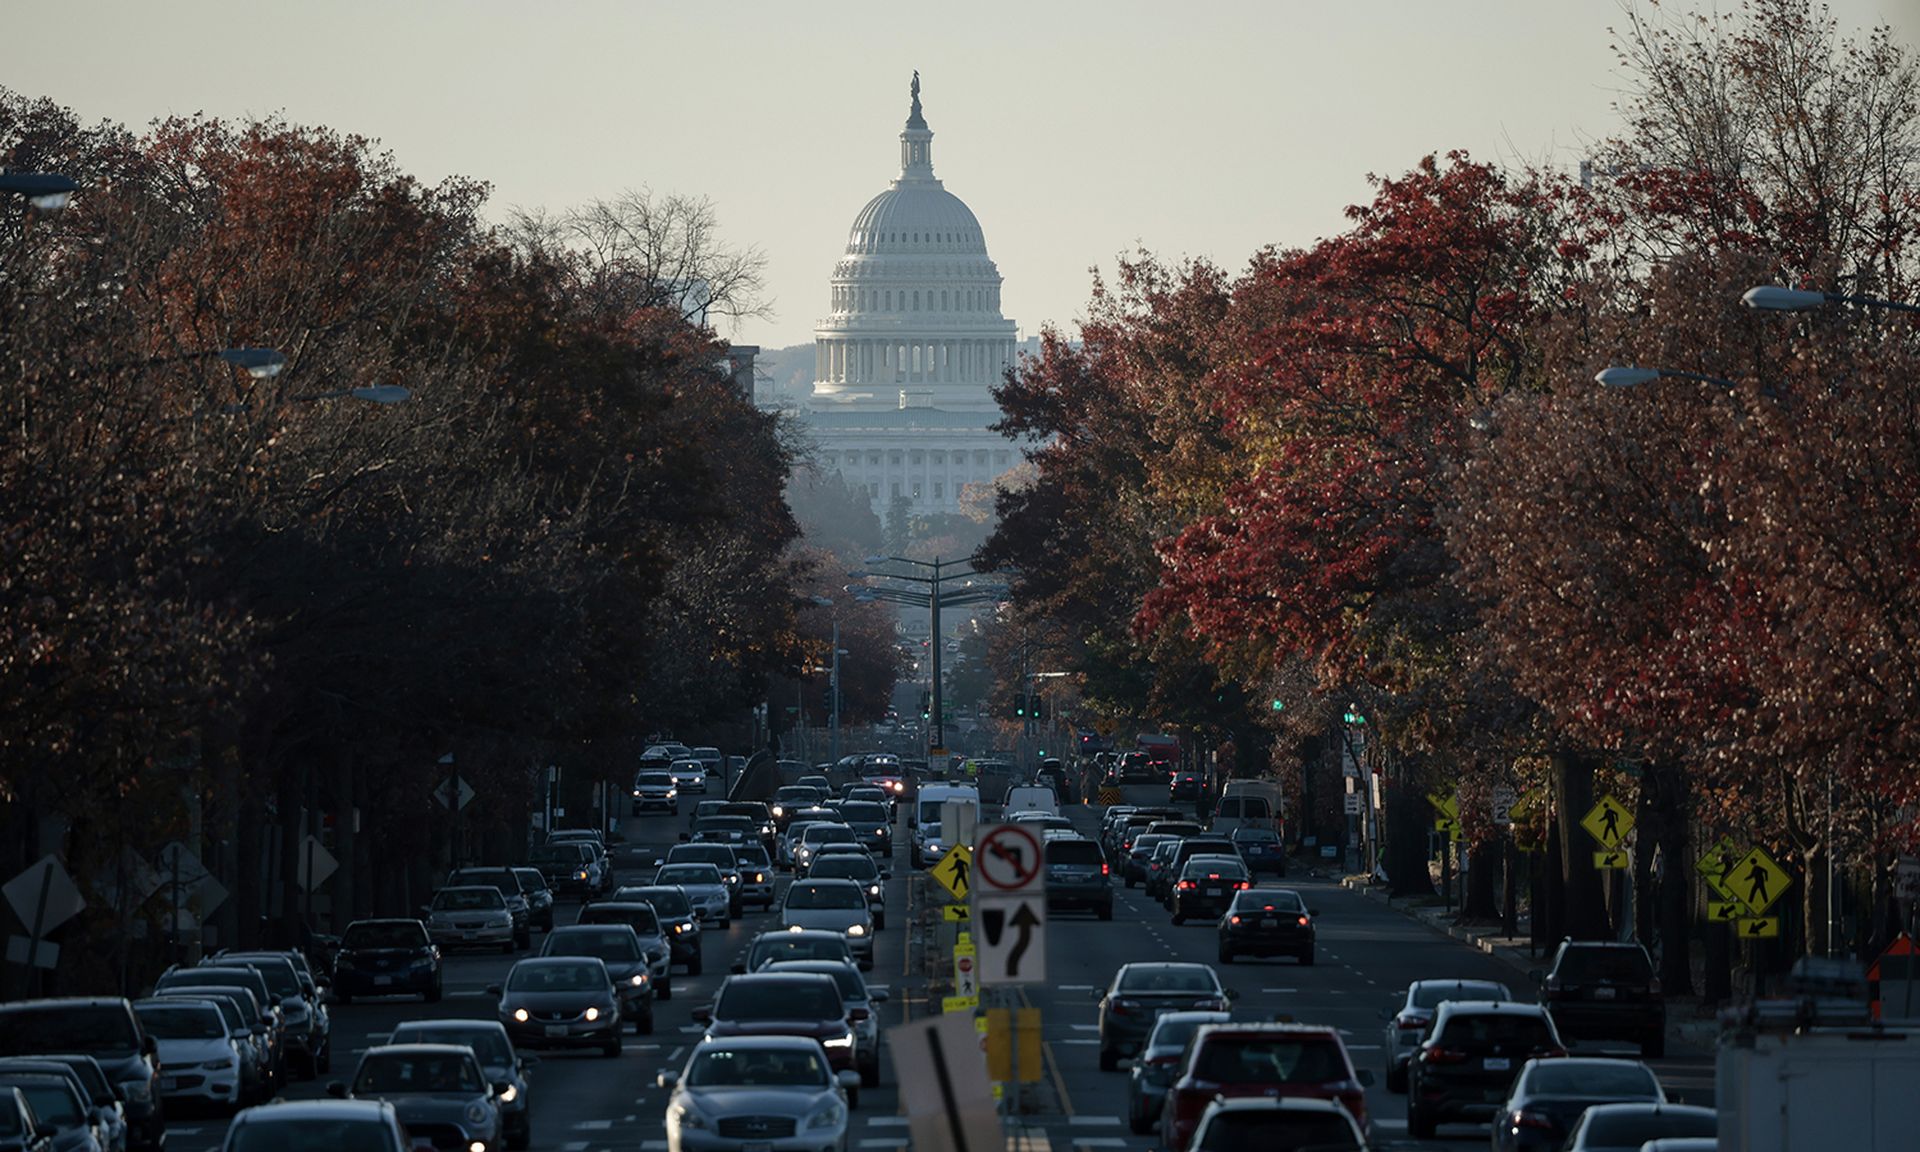 The U.S. Capitol dome is seen as traffic fills North Capitol Street on Nov. 23, 2021, in Washington. (Photo by Anna Moneymaker/Getty Images)